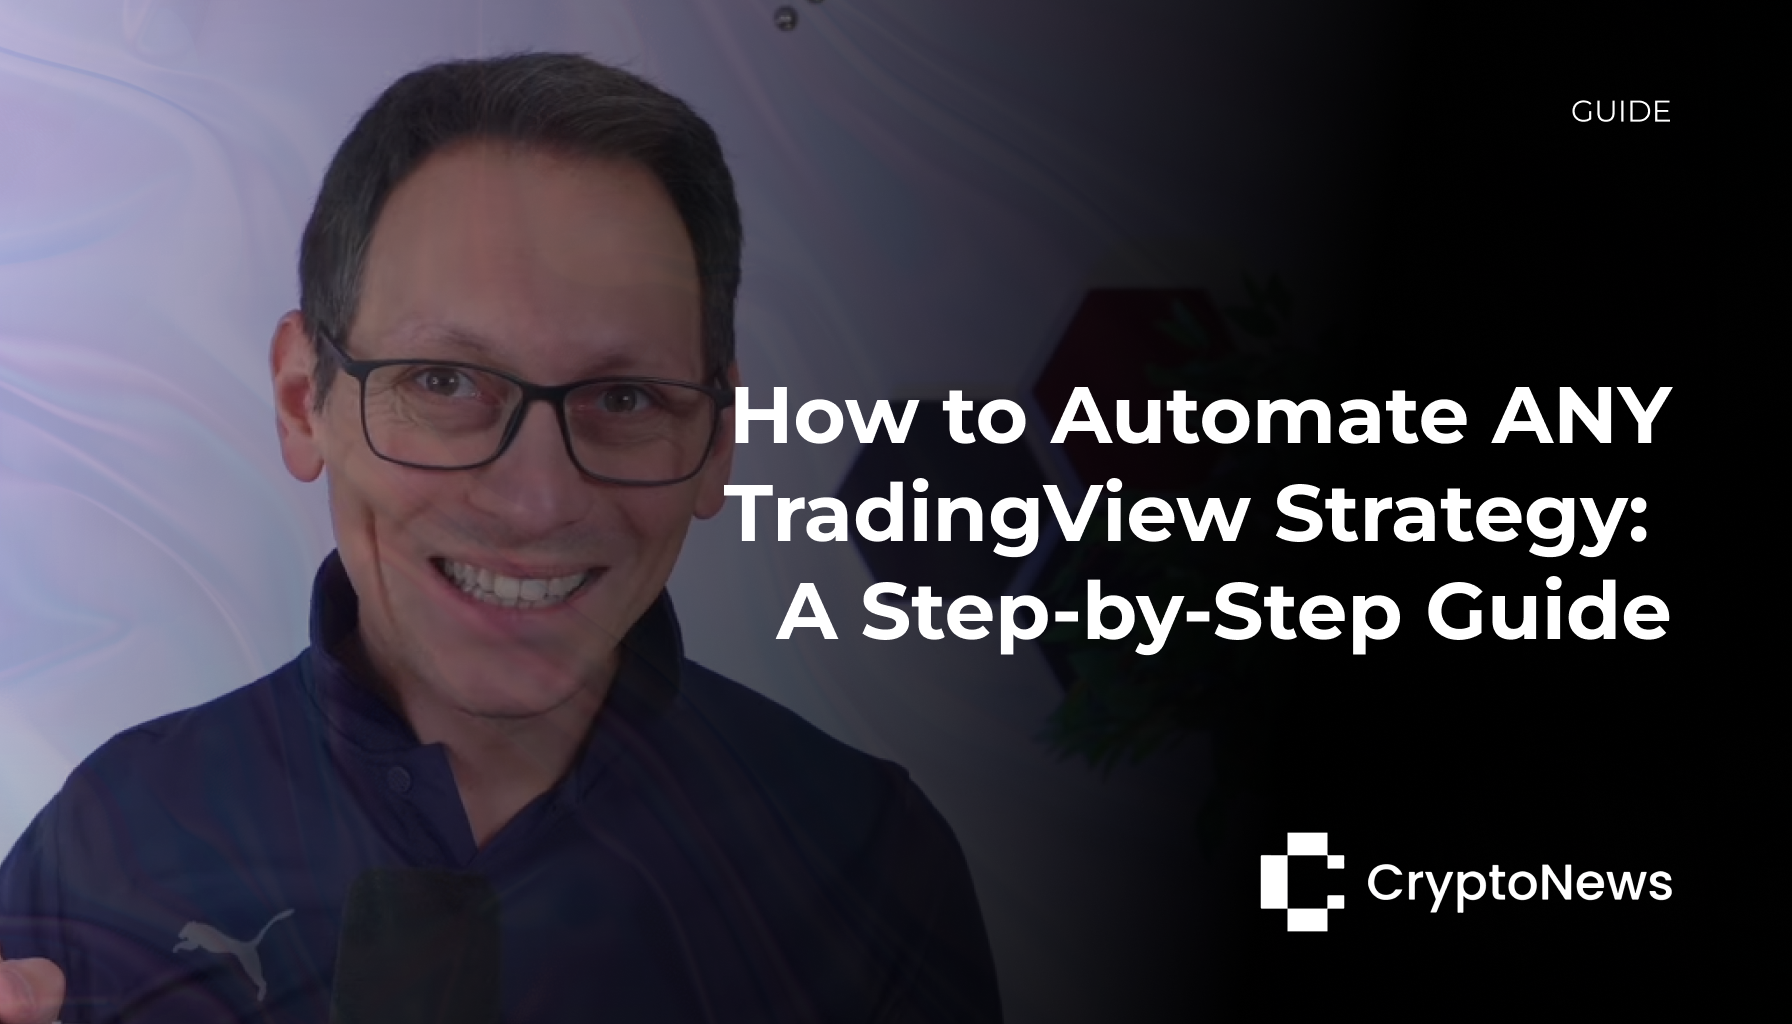 How to Automate ANY TradingView Strategy - Step-by-Step Guide